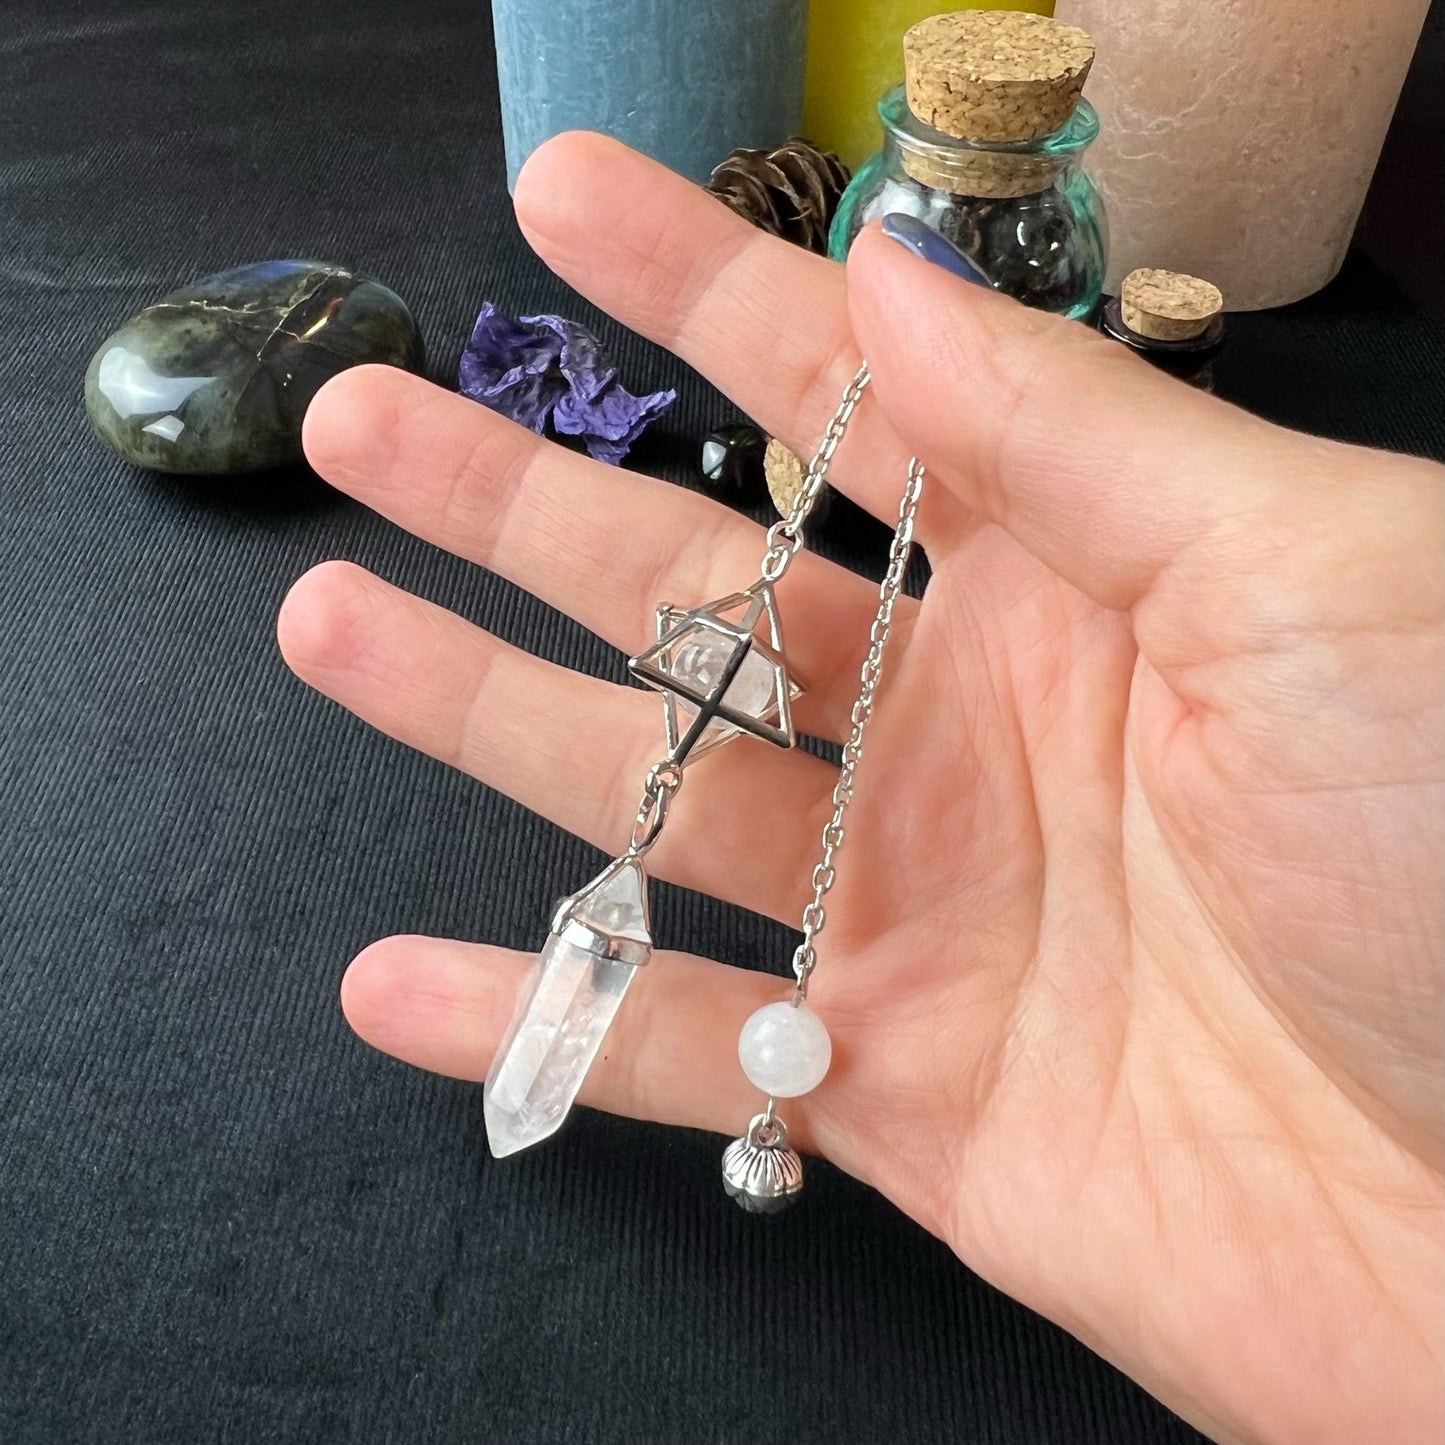 Clear quartz Merkaba and lotus seed divination pendulum - The French Witch shop